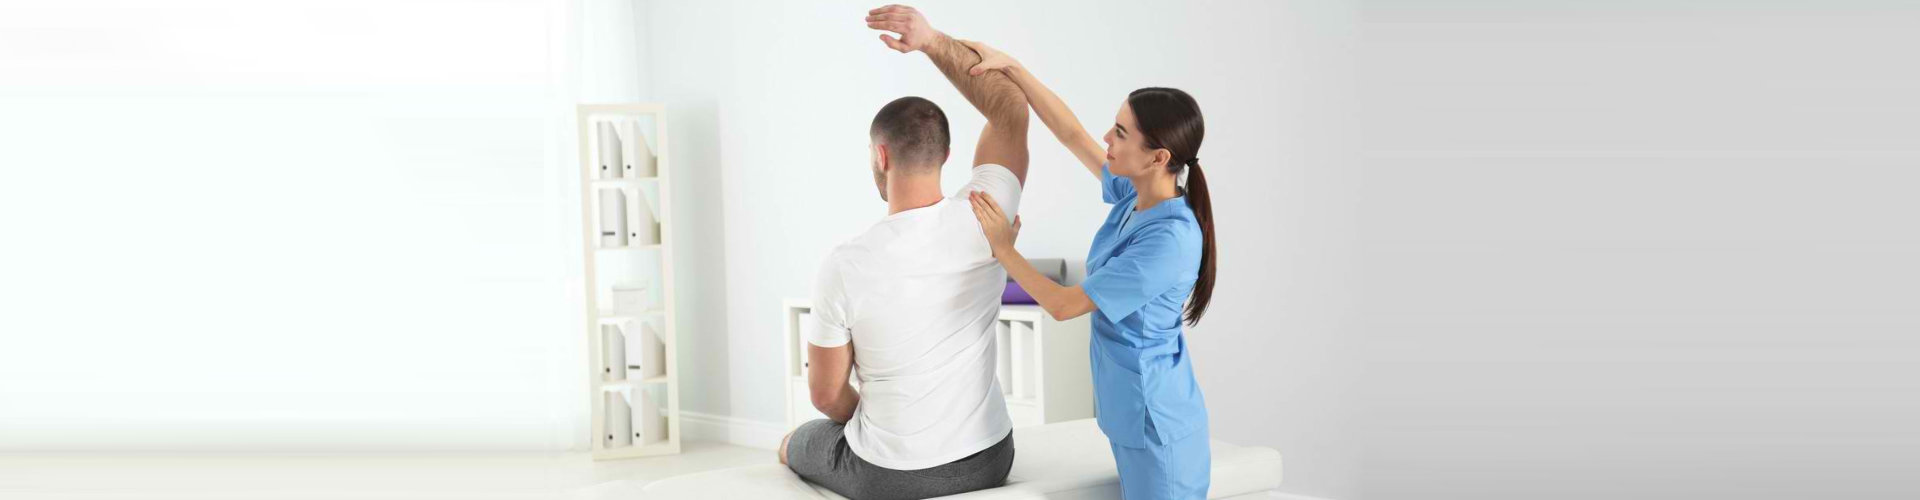 man having a physical therapy